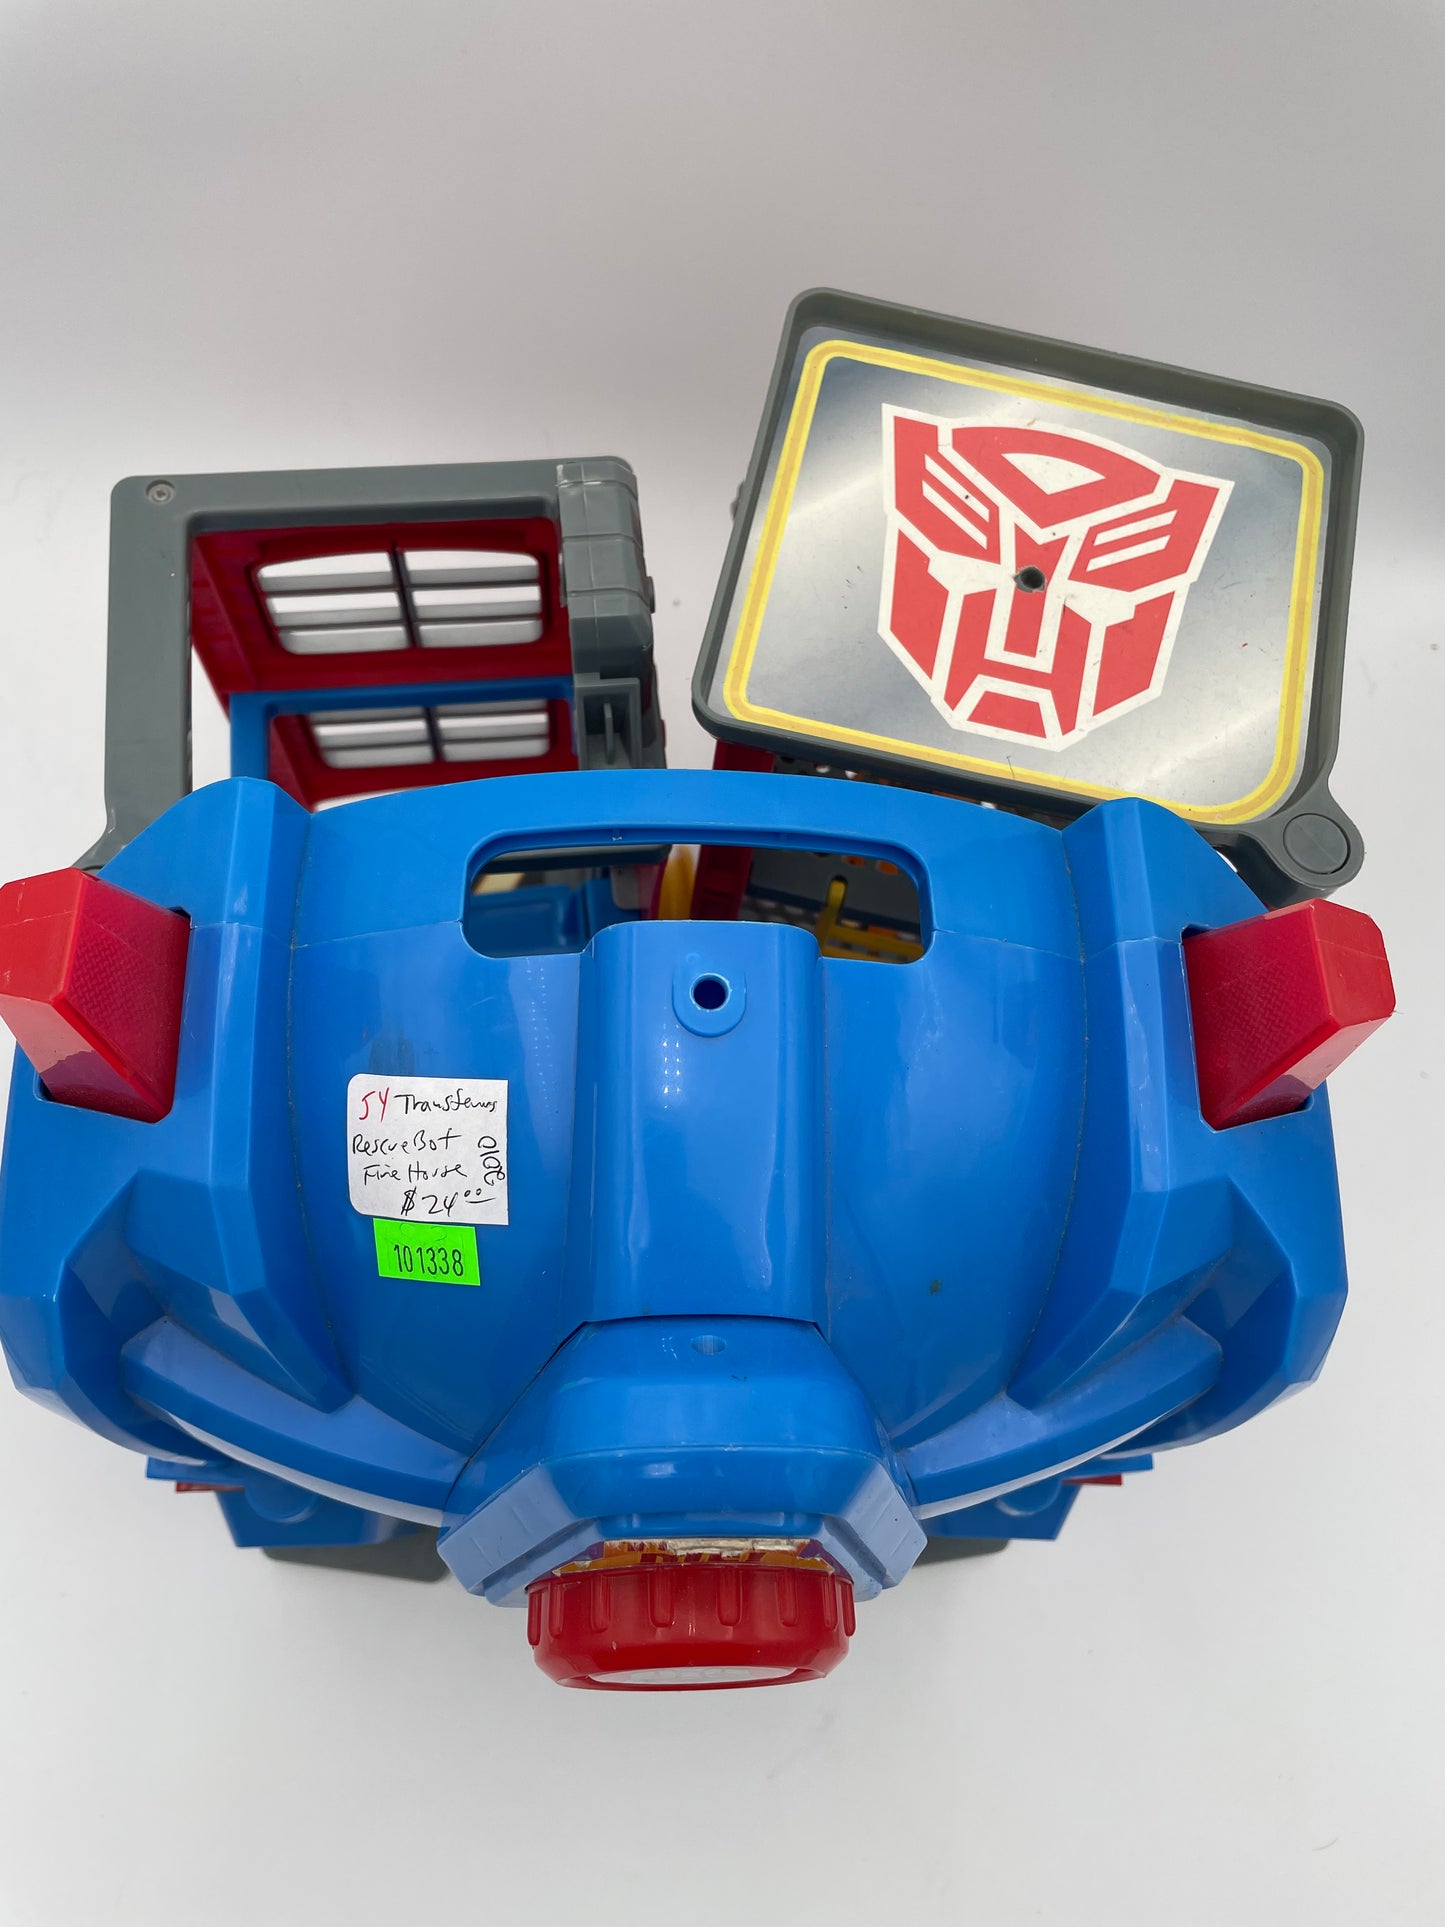 Transformers - Rescue Bots Firehouse 2010 #101338